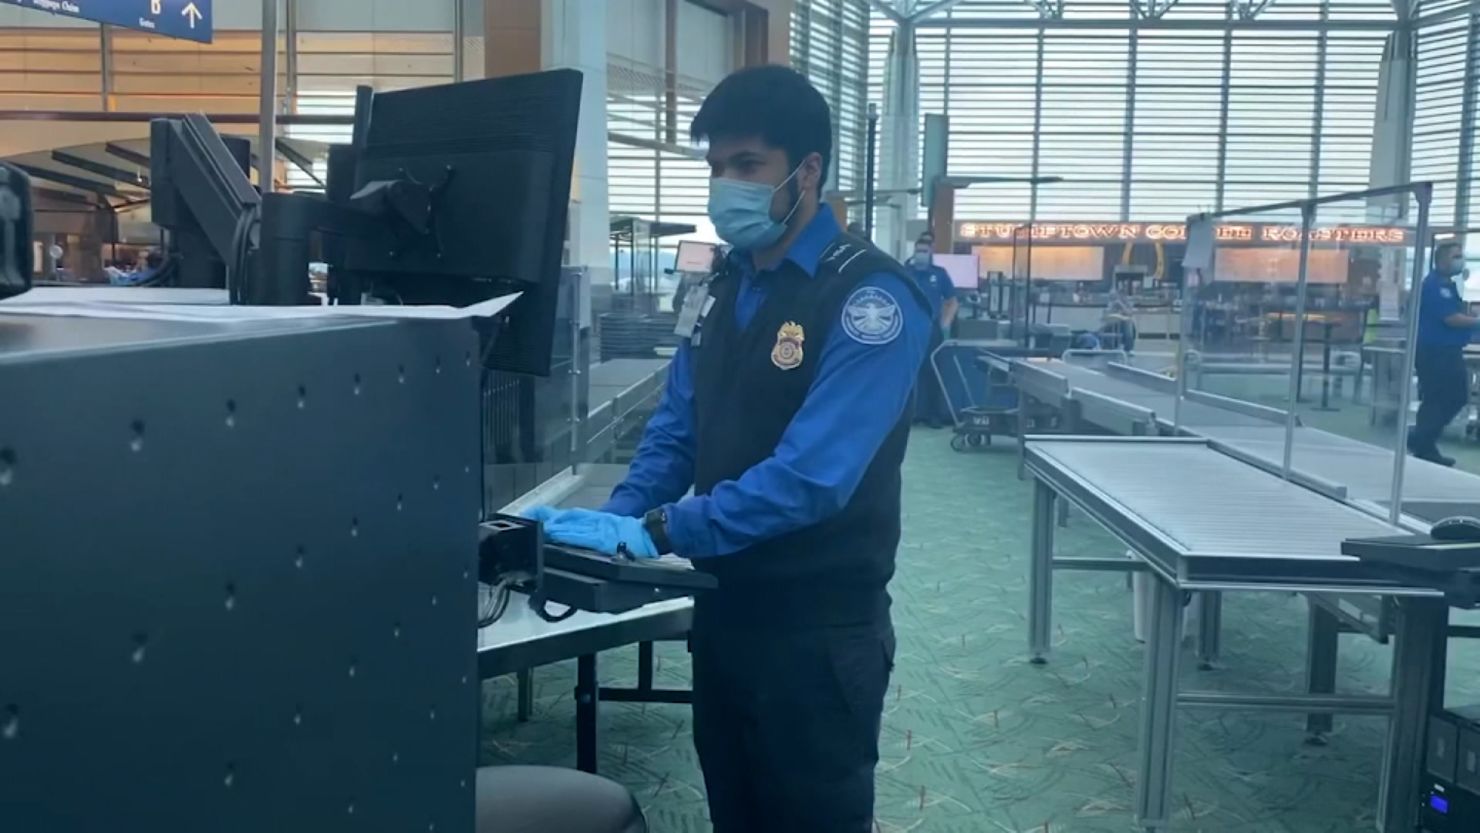 Transportation Security Officer Martin Rios said he'd heard about people flying to the wrong Portland by mistake, but this was the first time he'd seen it himself.